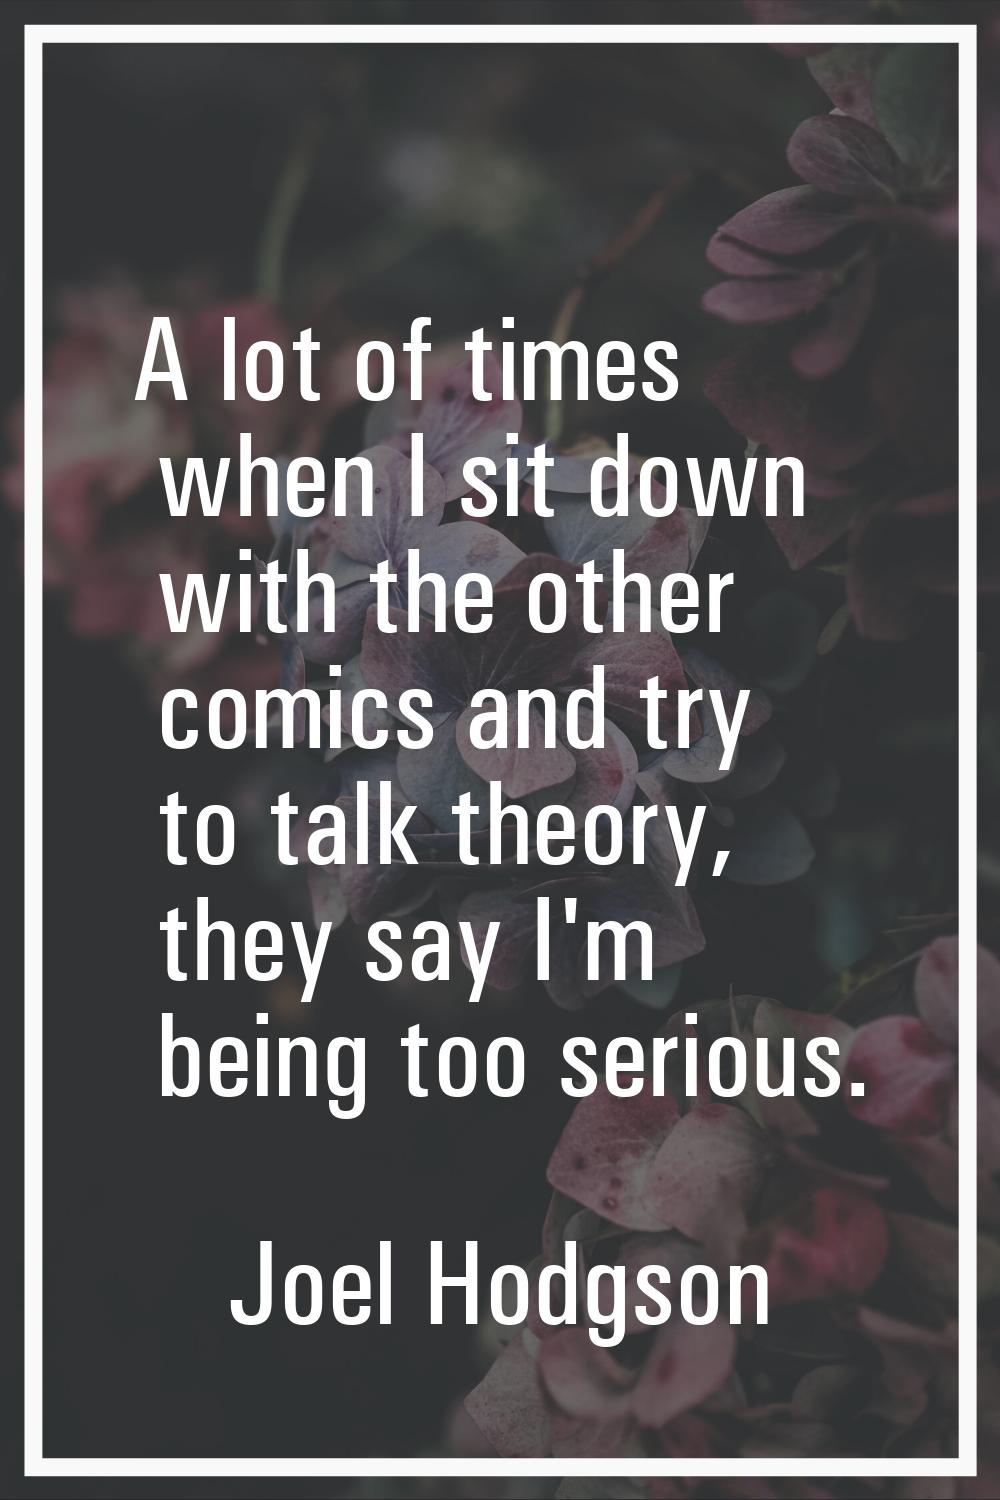 A lot of times when I sit down with the other comics and try to talk theory, they say I'm being too